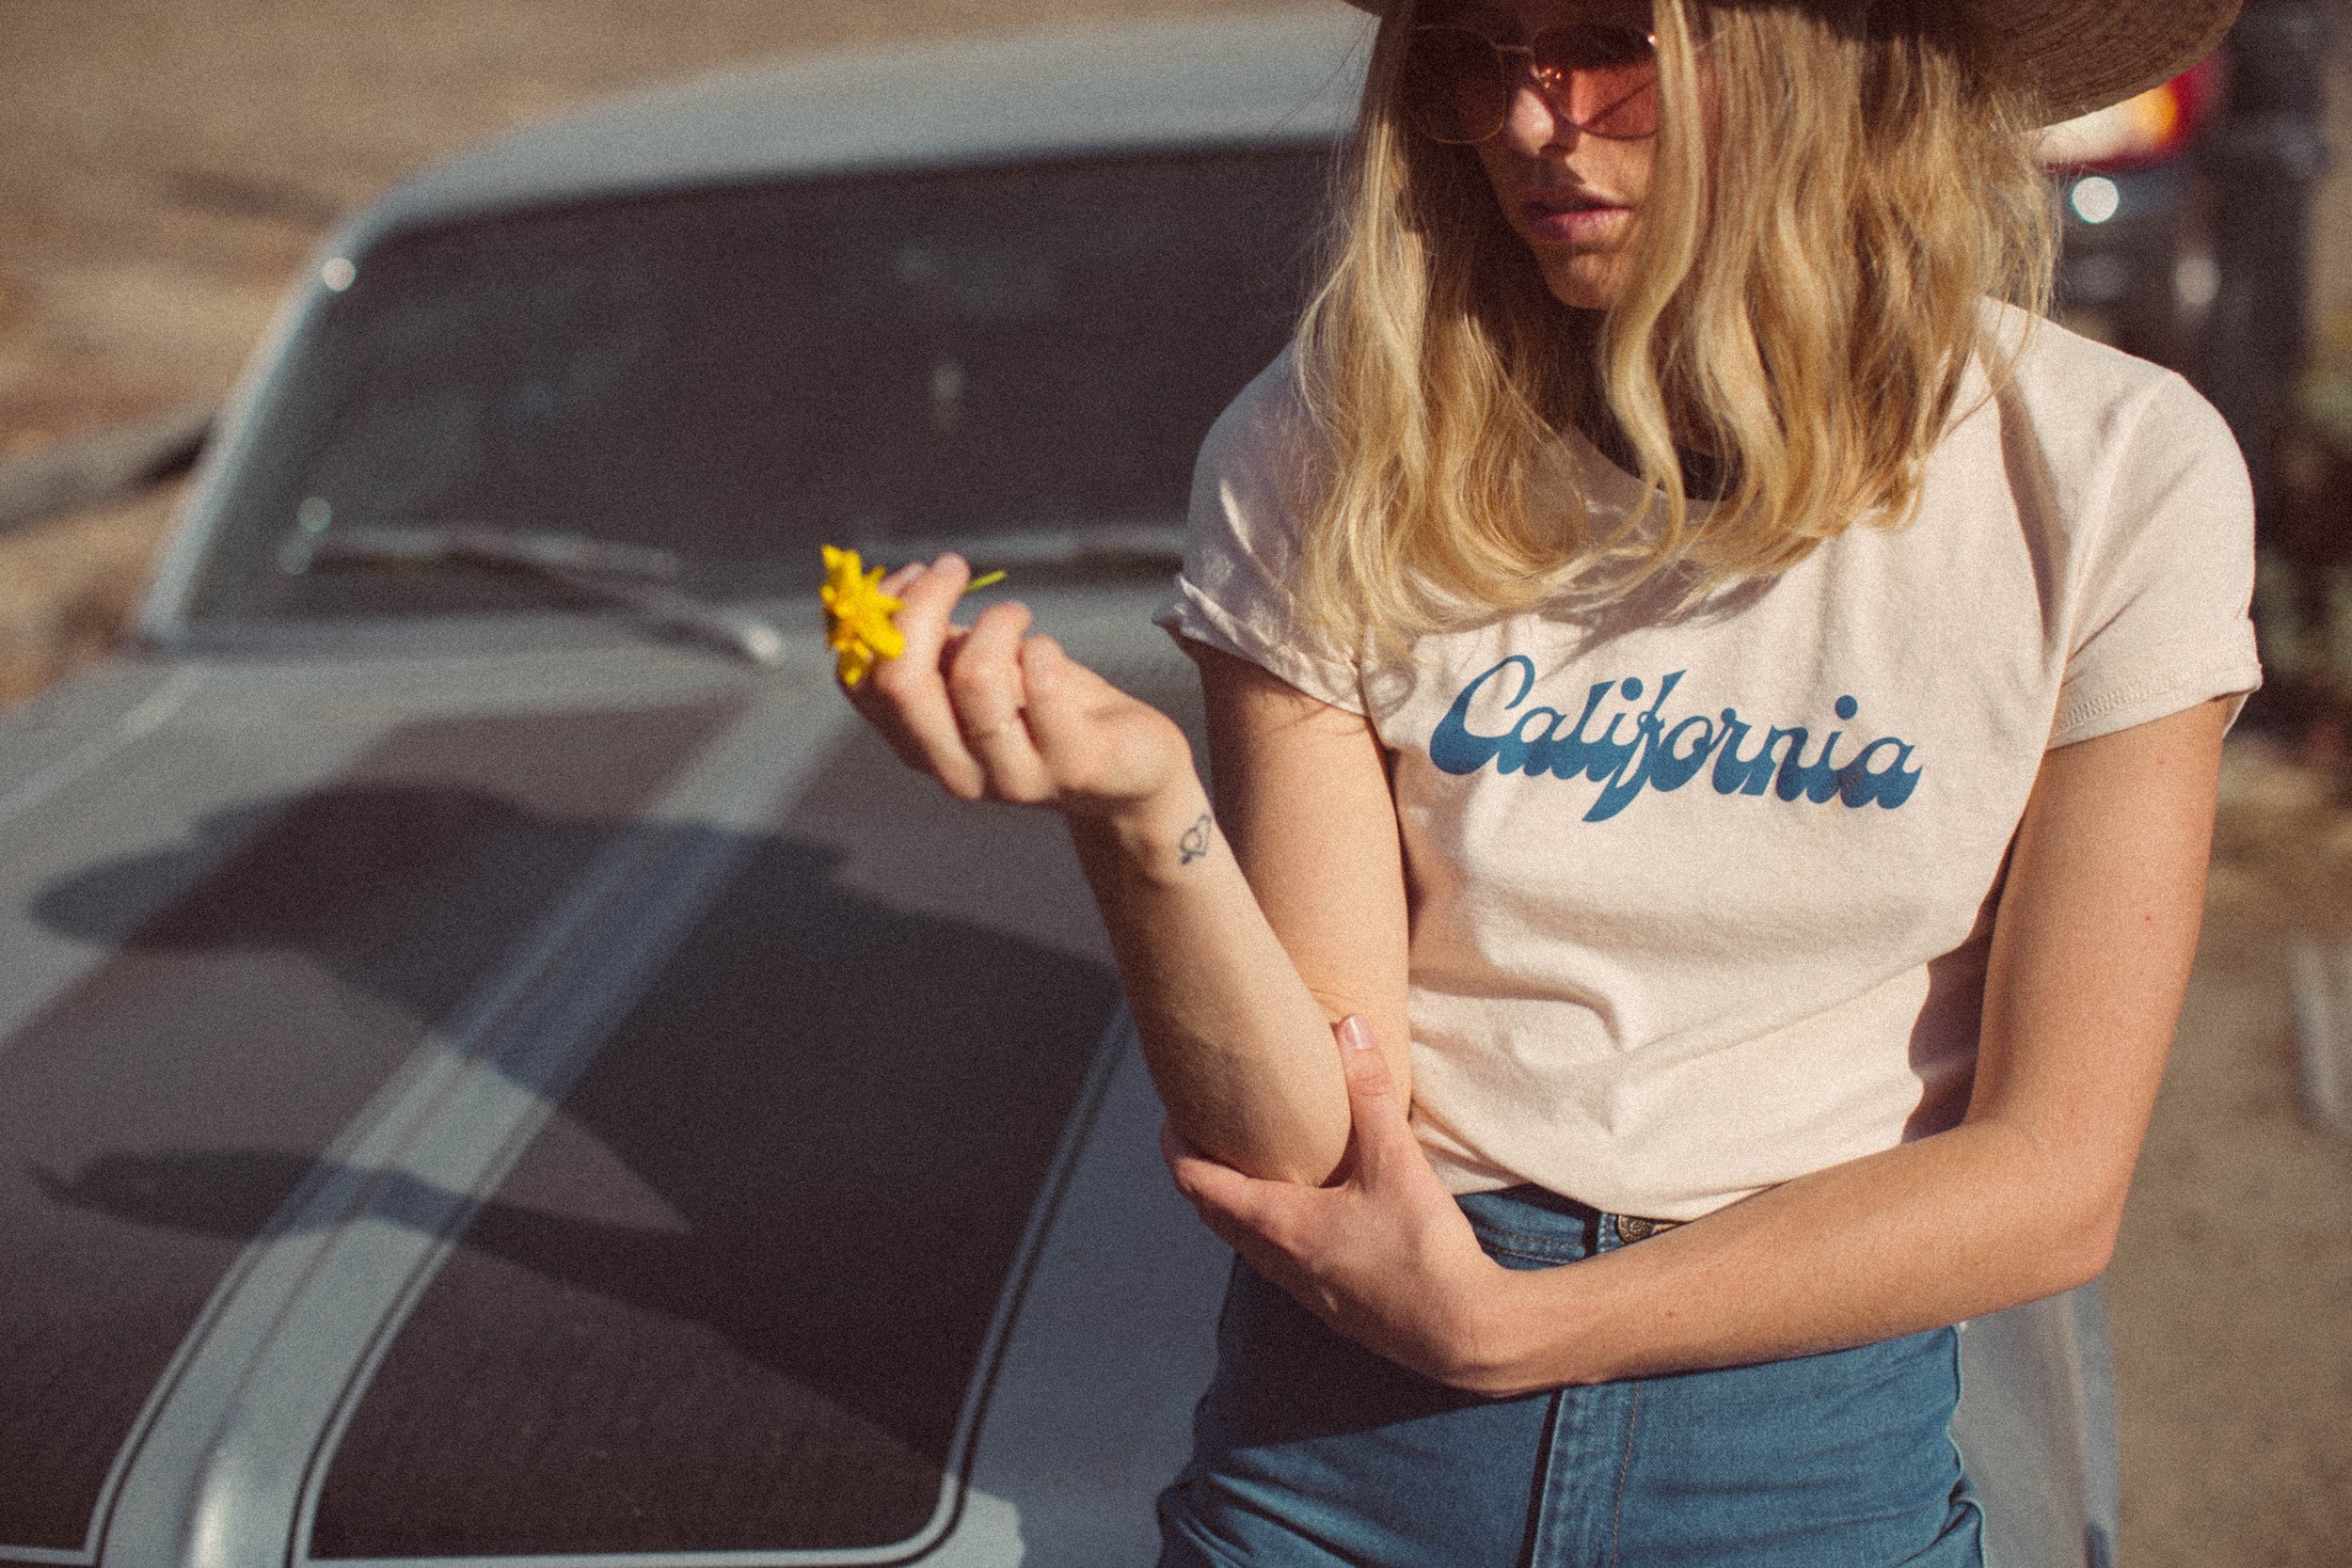 Image of a model sitting on a car wearing a t-shirt that reads "California"